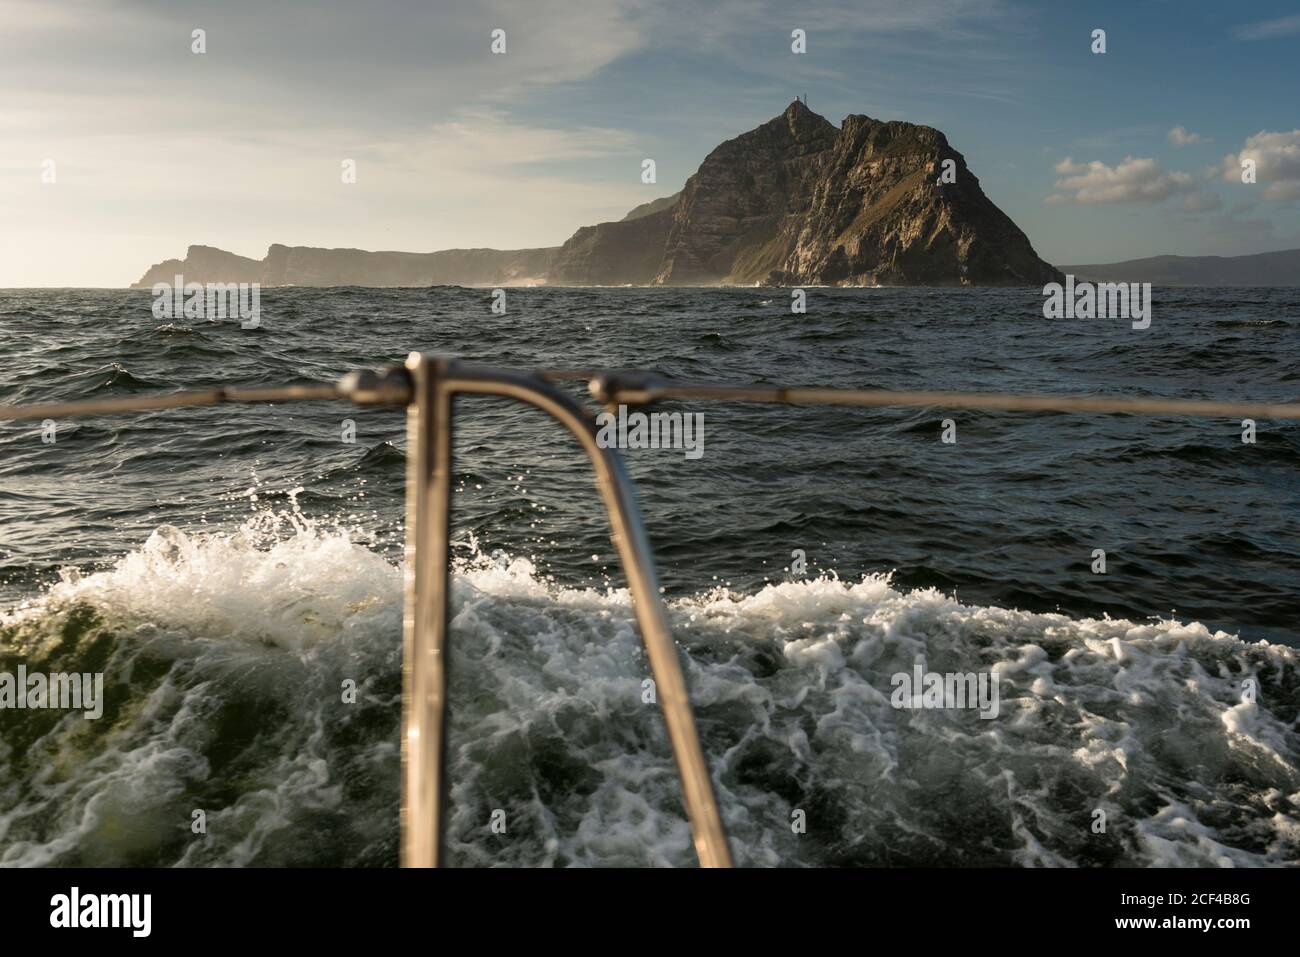 Cape of Good Hope seen from a yacht rounding the Cape from East to West in calm conditions and late afternoon light.  Atlantic Ocean off South Africa. Stock Photo